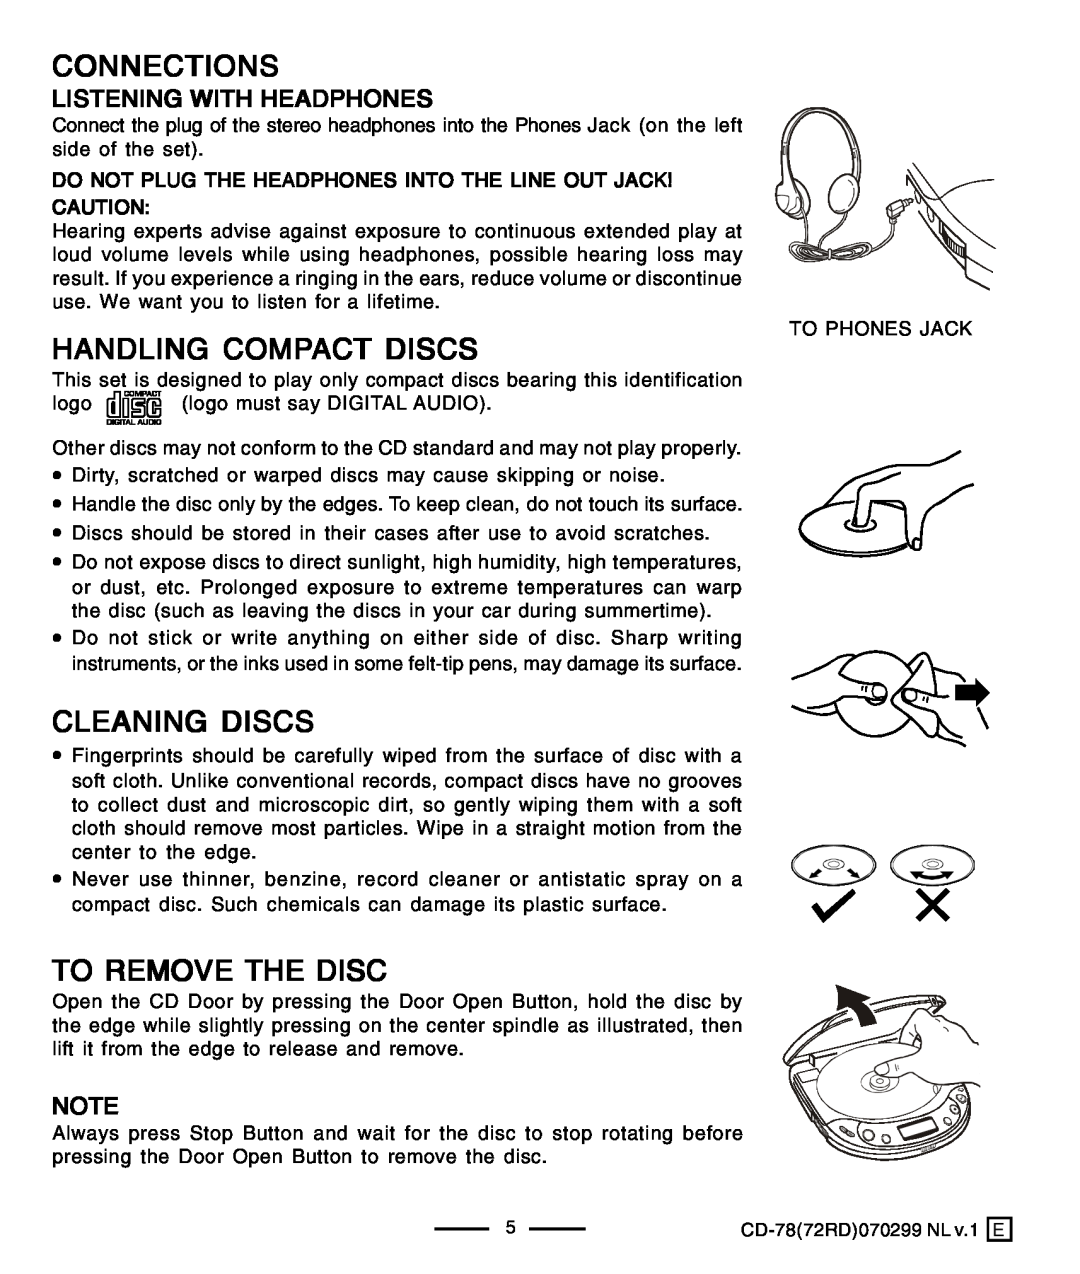 Lenoxx Electronics CD-78 operating instructions Connections, Handling Compact Discs, Cleaning Discs, To Remove The Disc 